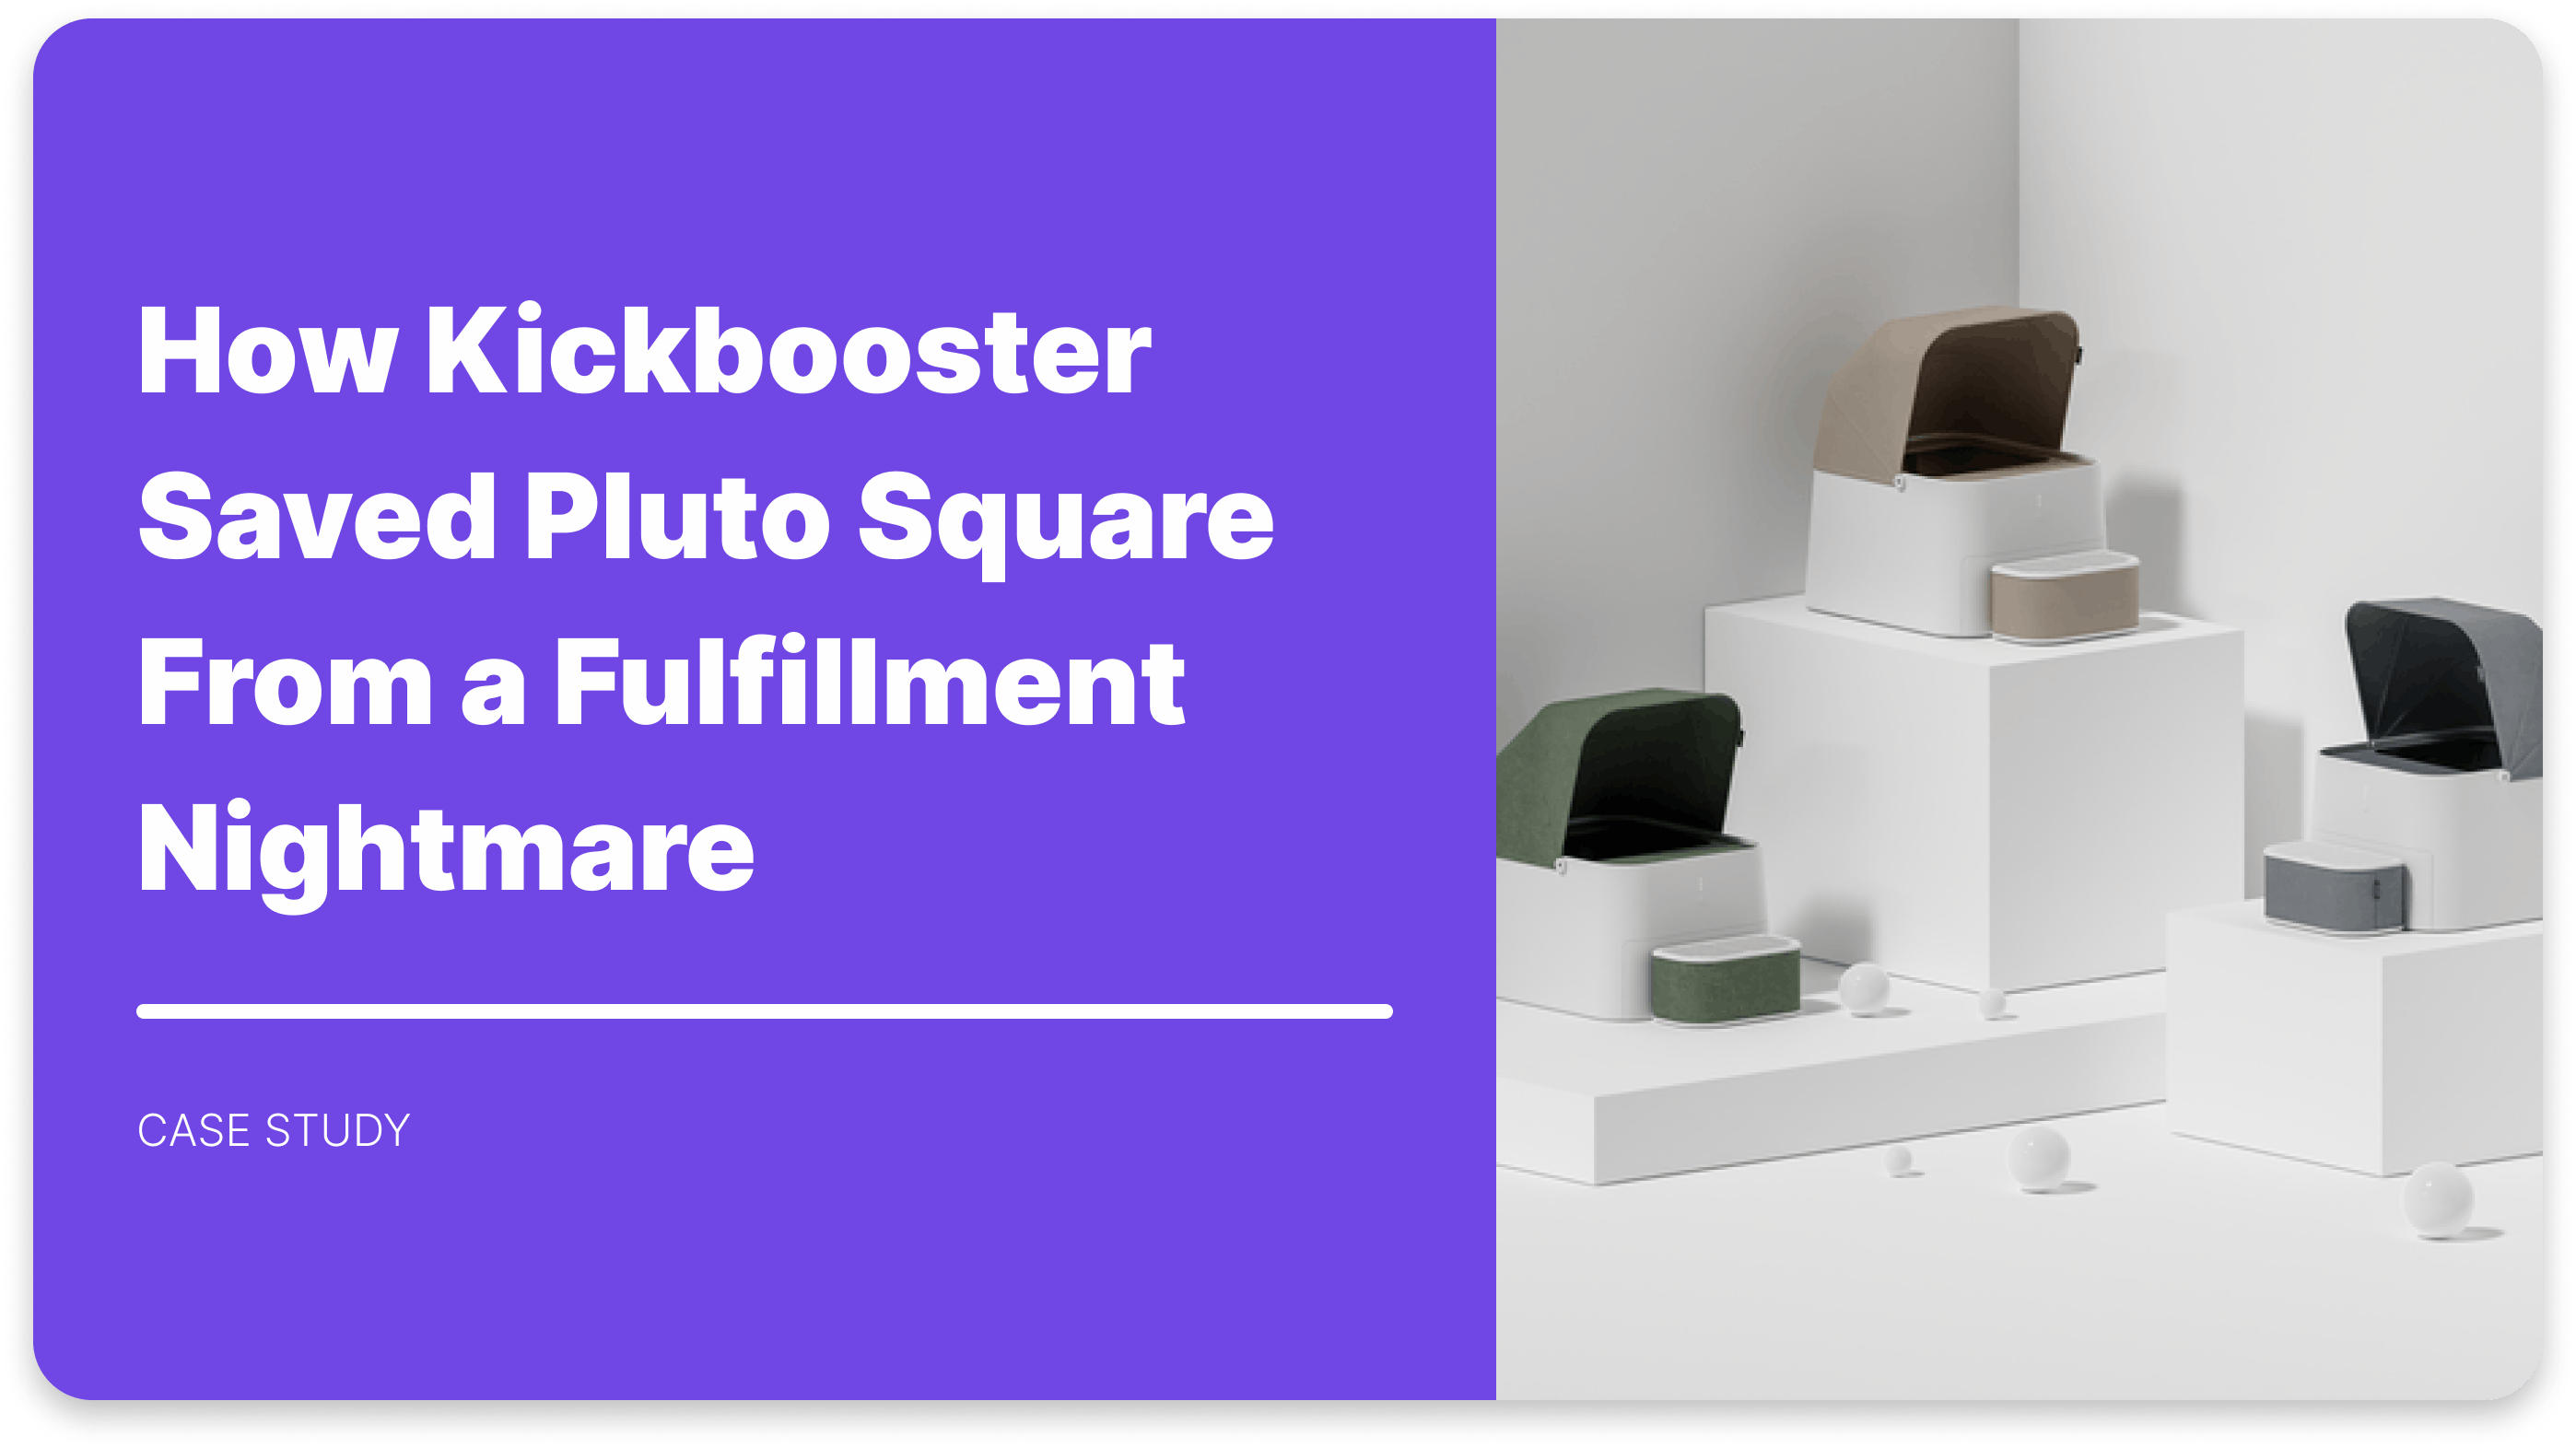 How Kickbooster Saved Pluto Square From a Fulfillment Nightmare